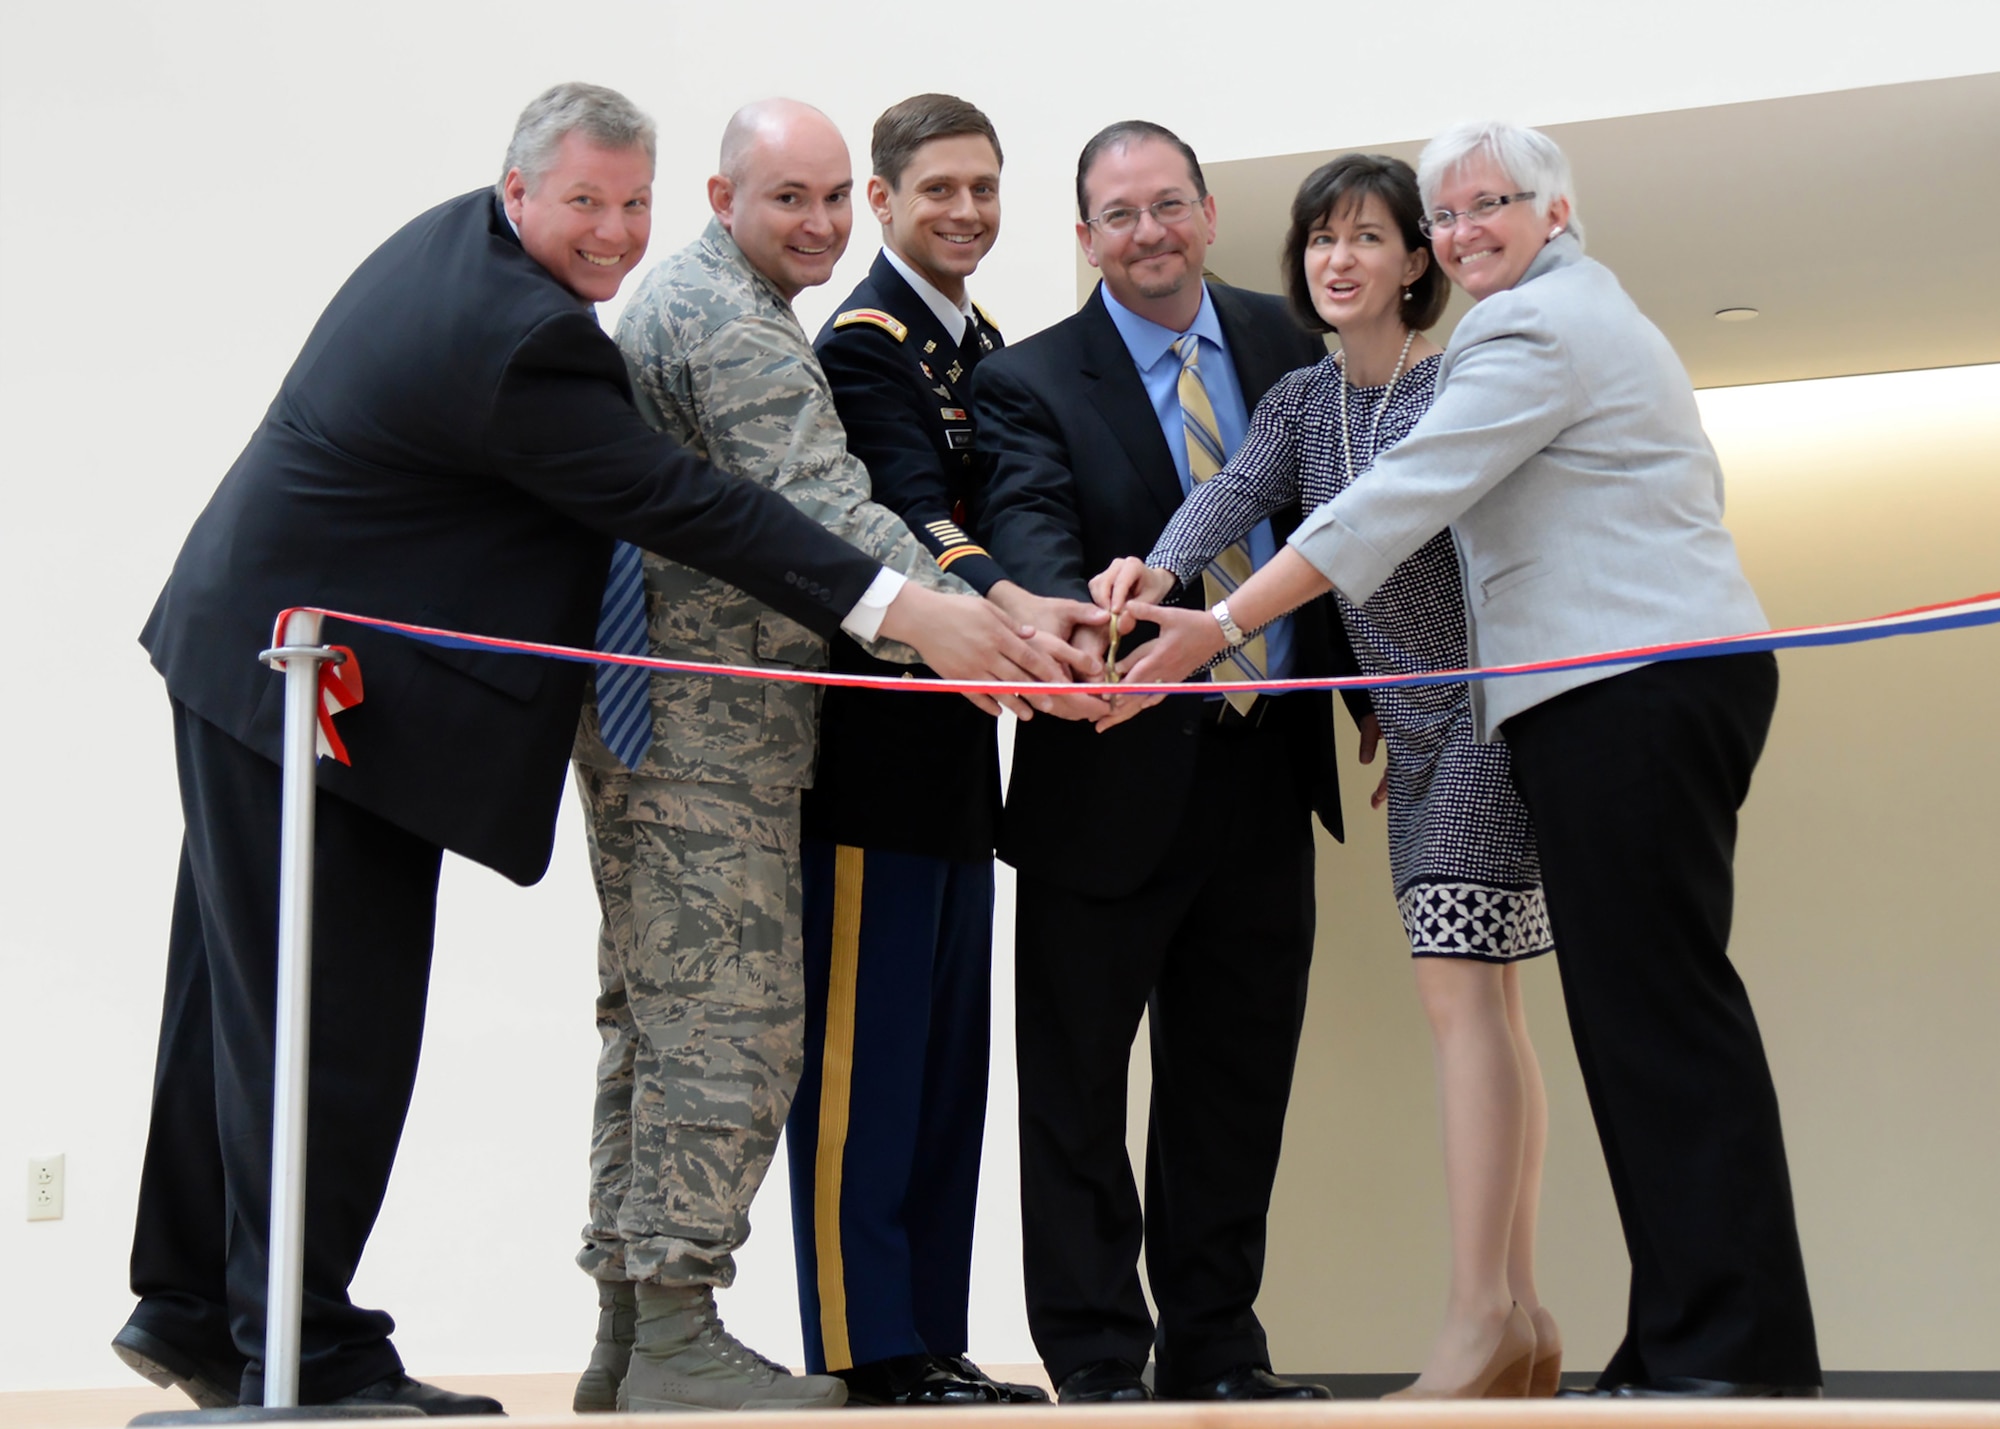 From left-to-right, Erich Ledebuhr, Hanscom Middle School principal; Col. David Dunklee, installation commander; Lt. Col. Daniel Herlihy, U.S. Army Corps of Engineers New England District deputy commander; Jonathan Braley, J & J Contractors president; Jennifer Glass, Lincoln School Committee chair; and Dr. Rebecca McFall, Lincoln superintendent of schools, prepare to cut a ribbon to mark the completion of a $34 million Hanscom Middle School on base June 2. The new school replaces a 1950s-era building with 21st Century Learning methods. (U.S. Air Force photo by Linda LaBonte Britt)